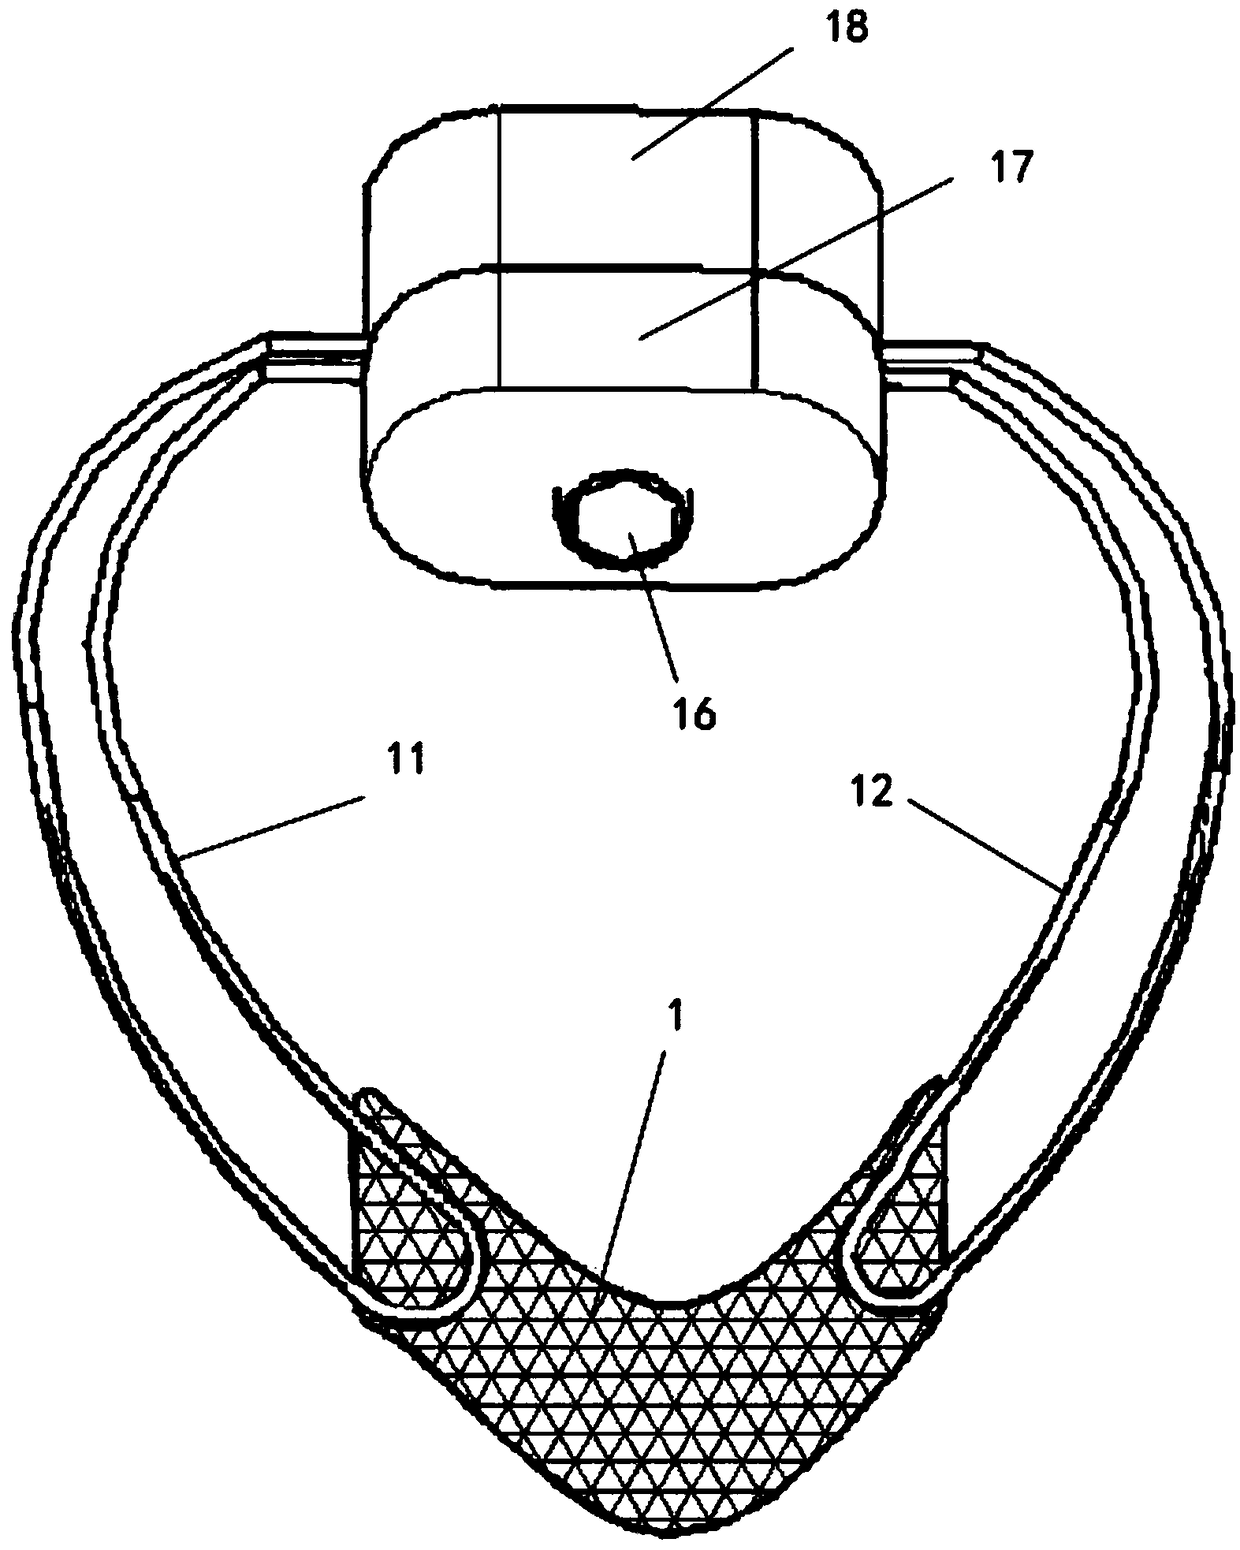 An adjustable urinary incontinence hanger